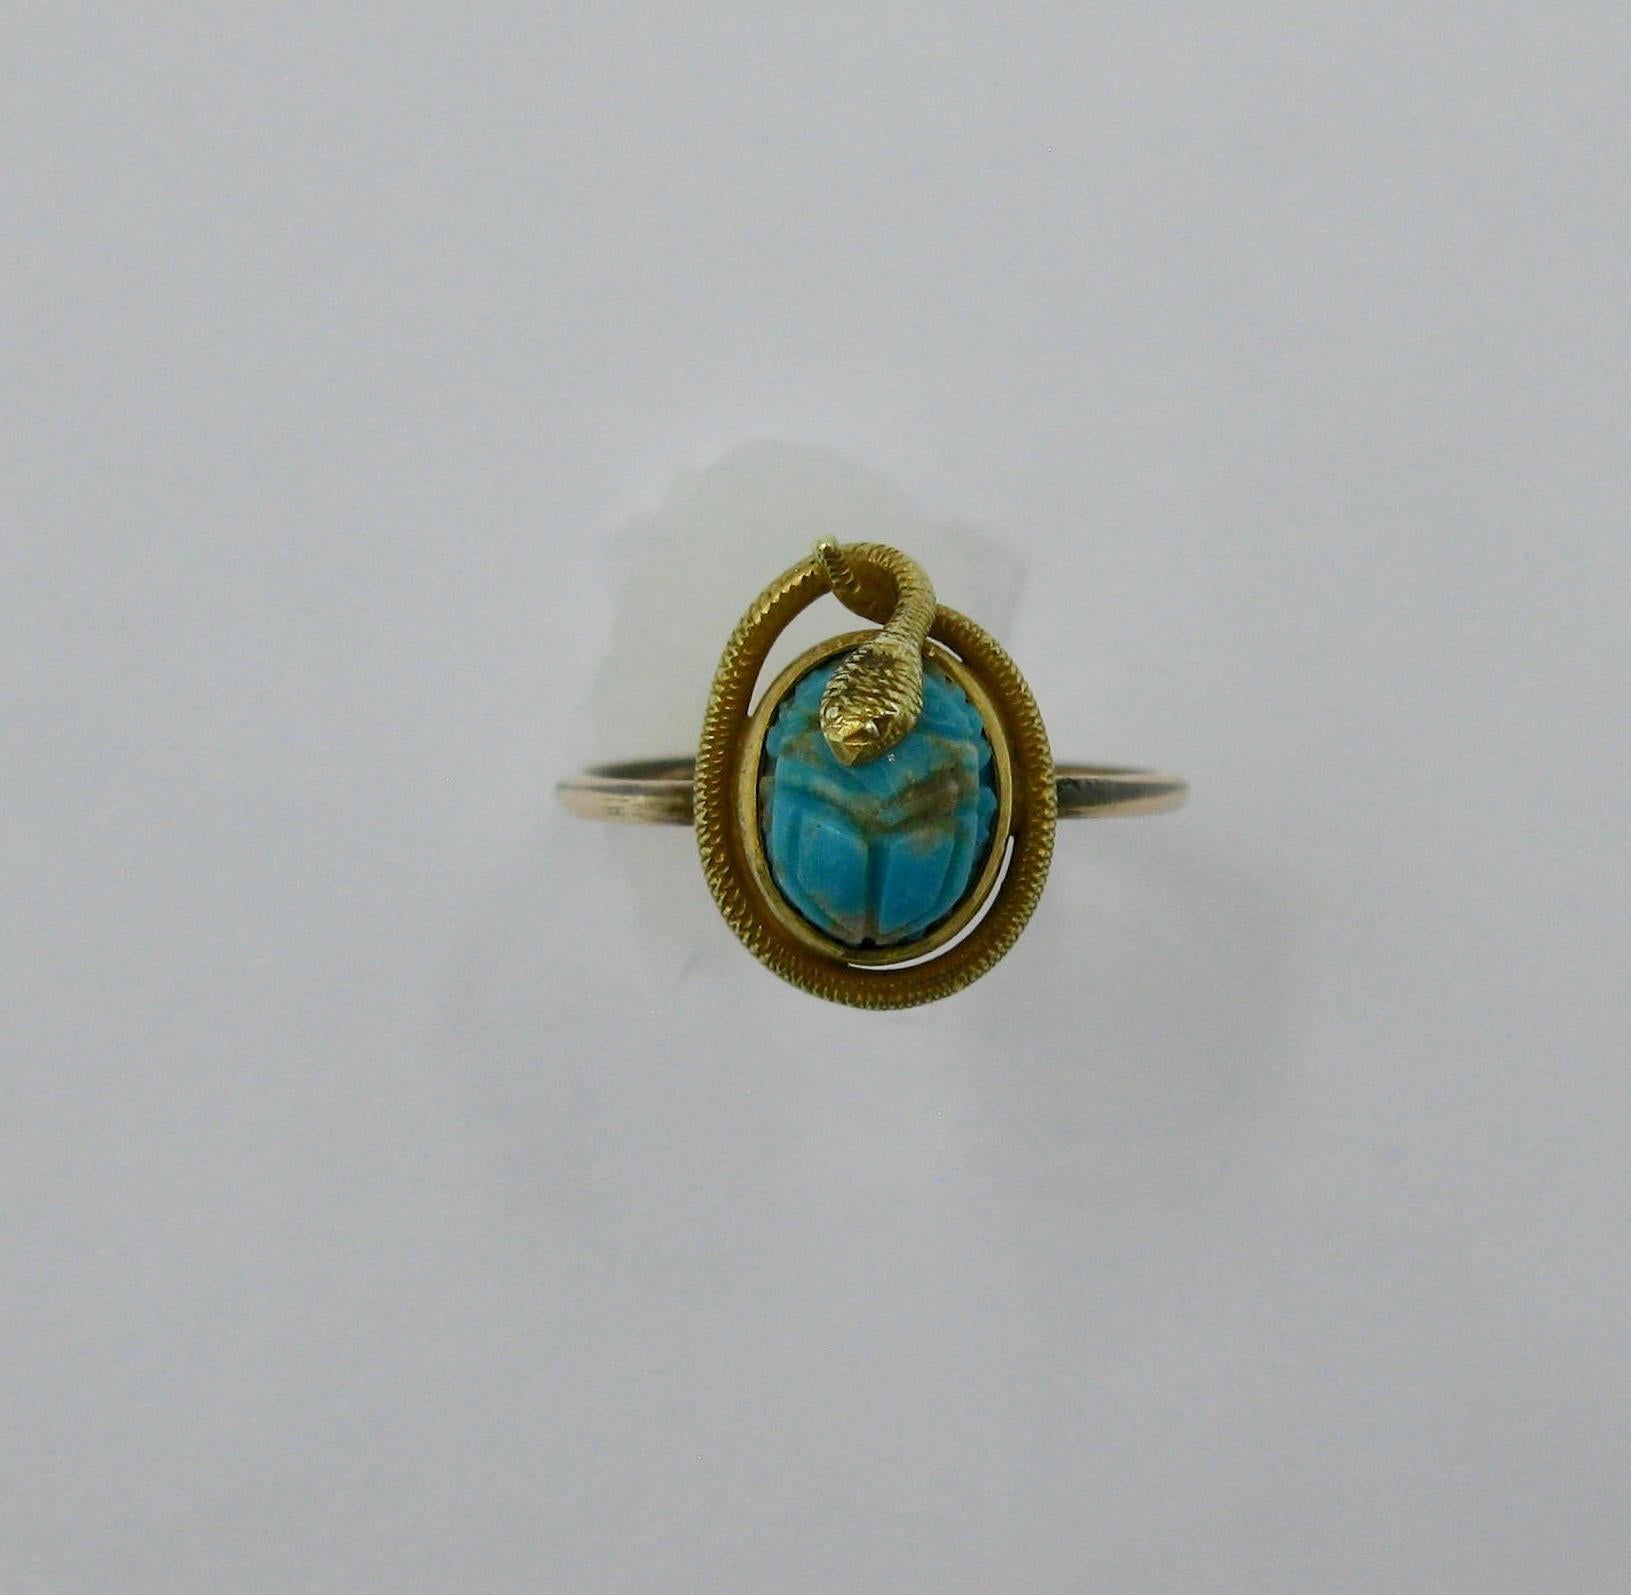 A very rare antique Egyptian Revival Ring with a snake curled around a Turquoise Scarab - how wonderful!  The Scarab is hand carved of natural Persian Turquoise.  The serpent snake wraps around the scarab.   The snake is beautifully detailed with